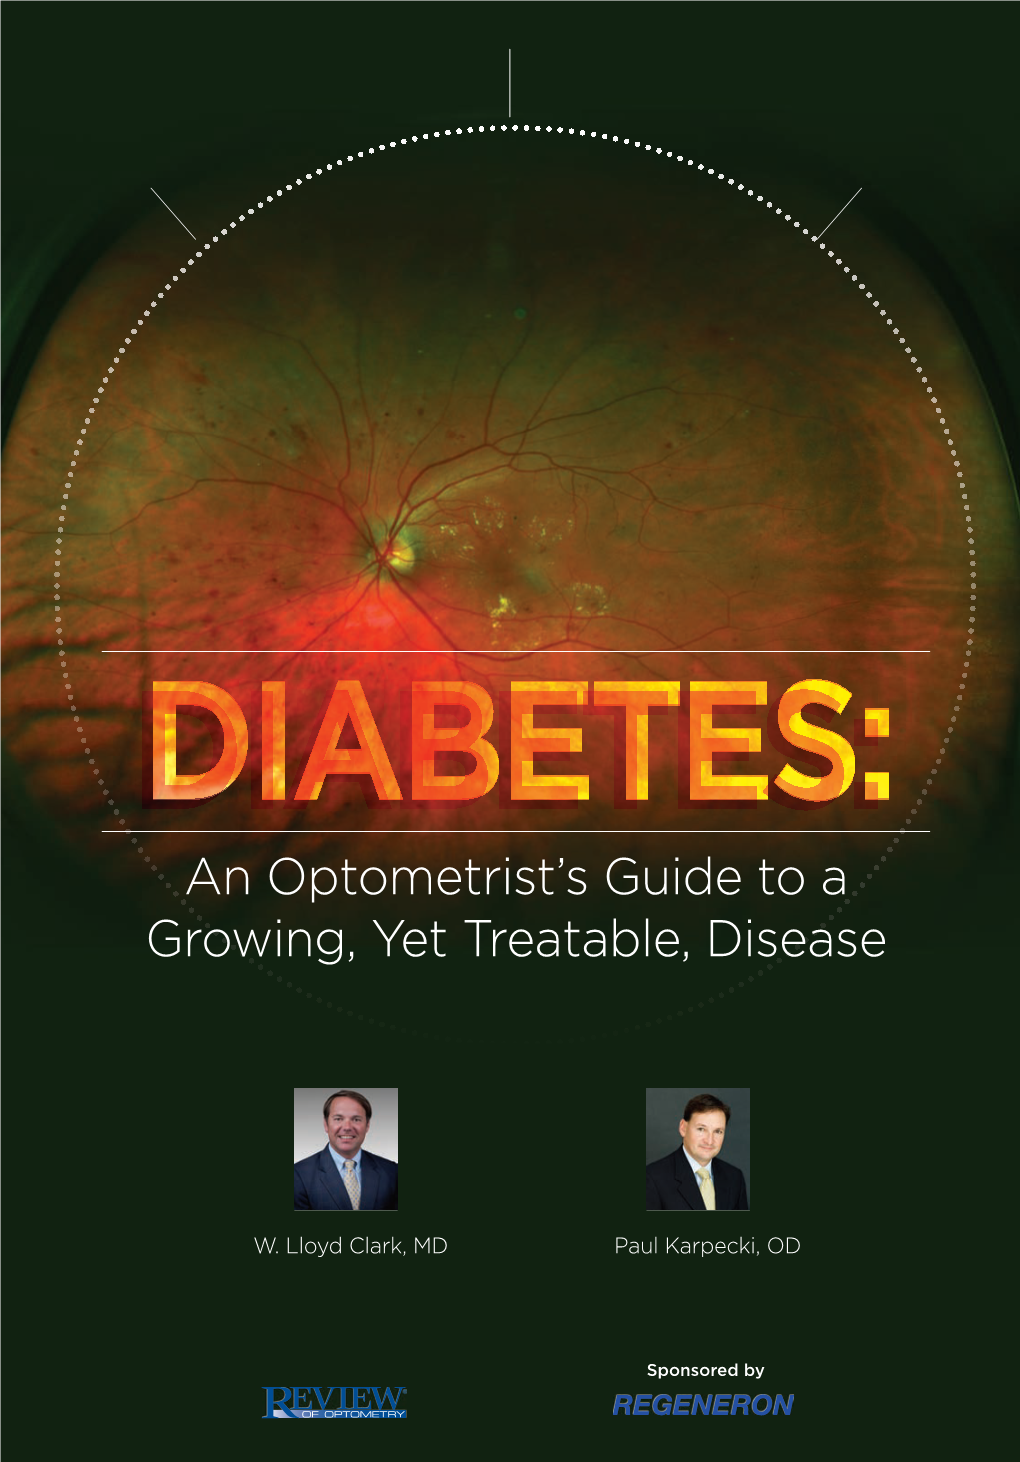 An Optometrist's Guide to a Growing, Yet Treatable, Disease